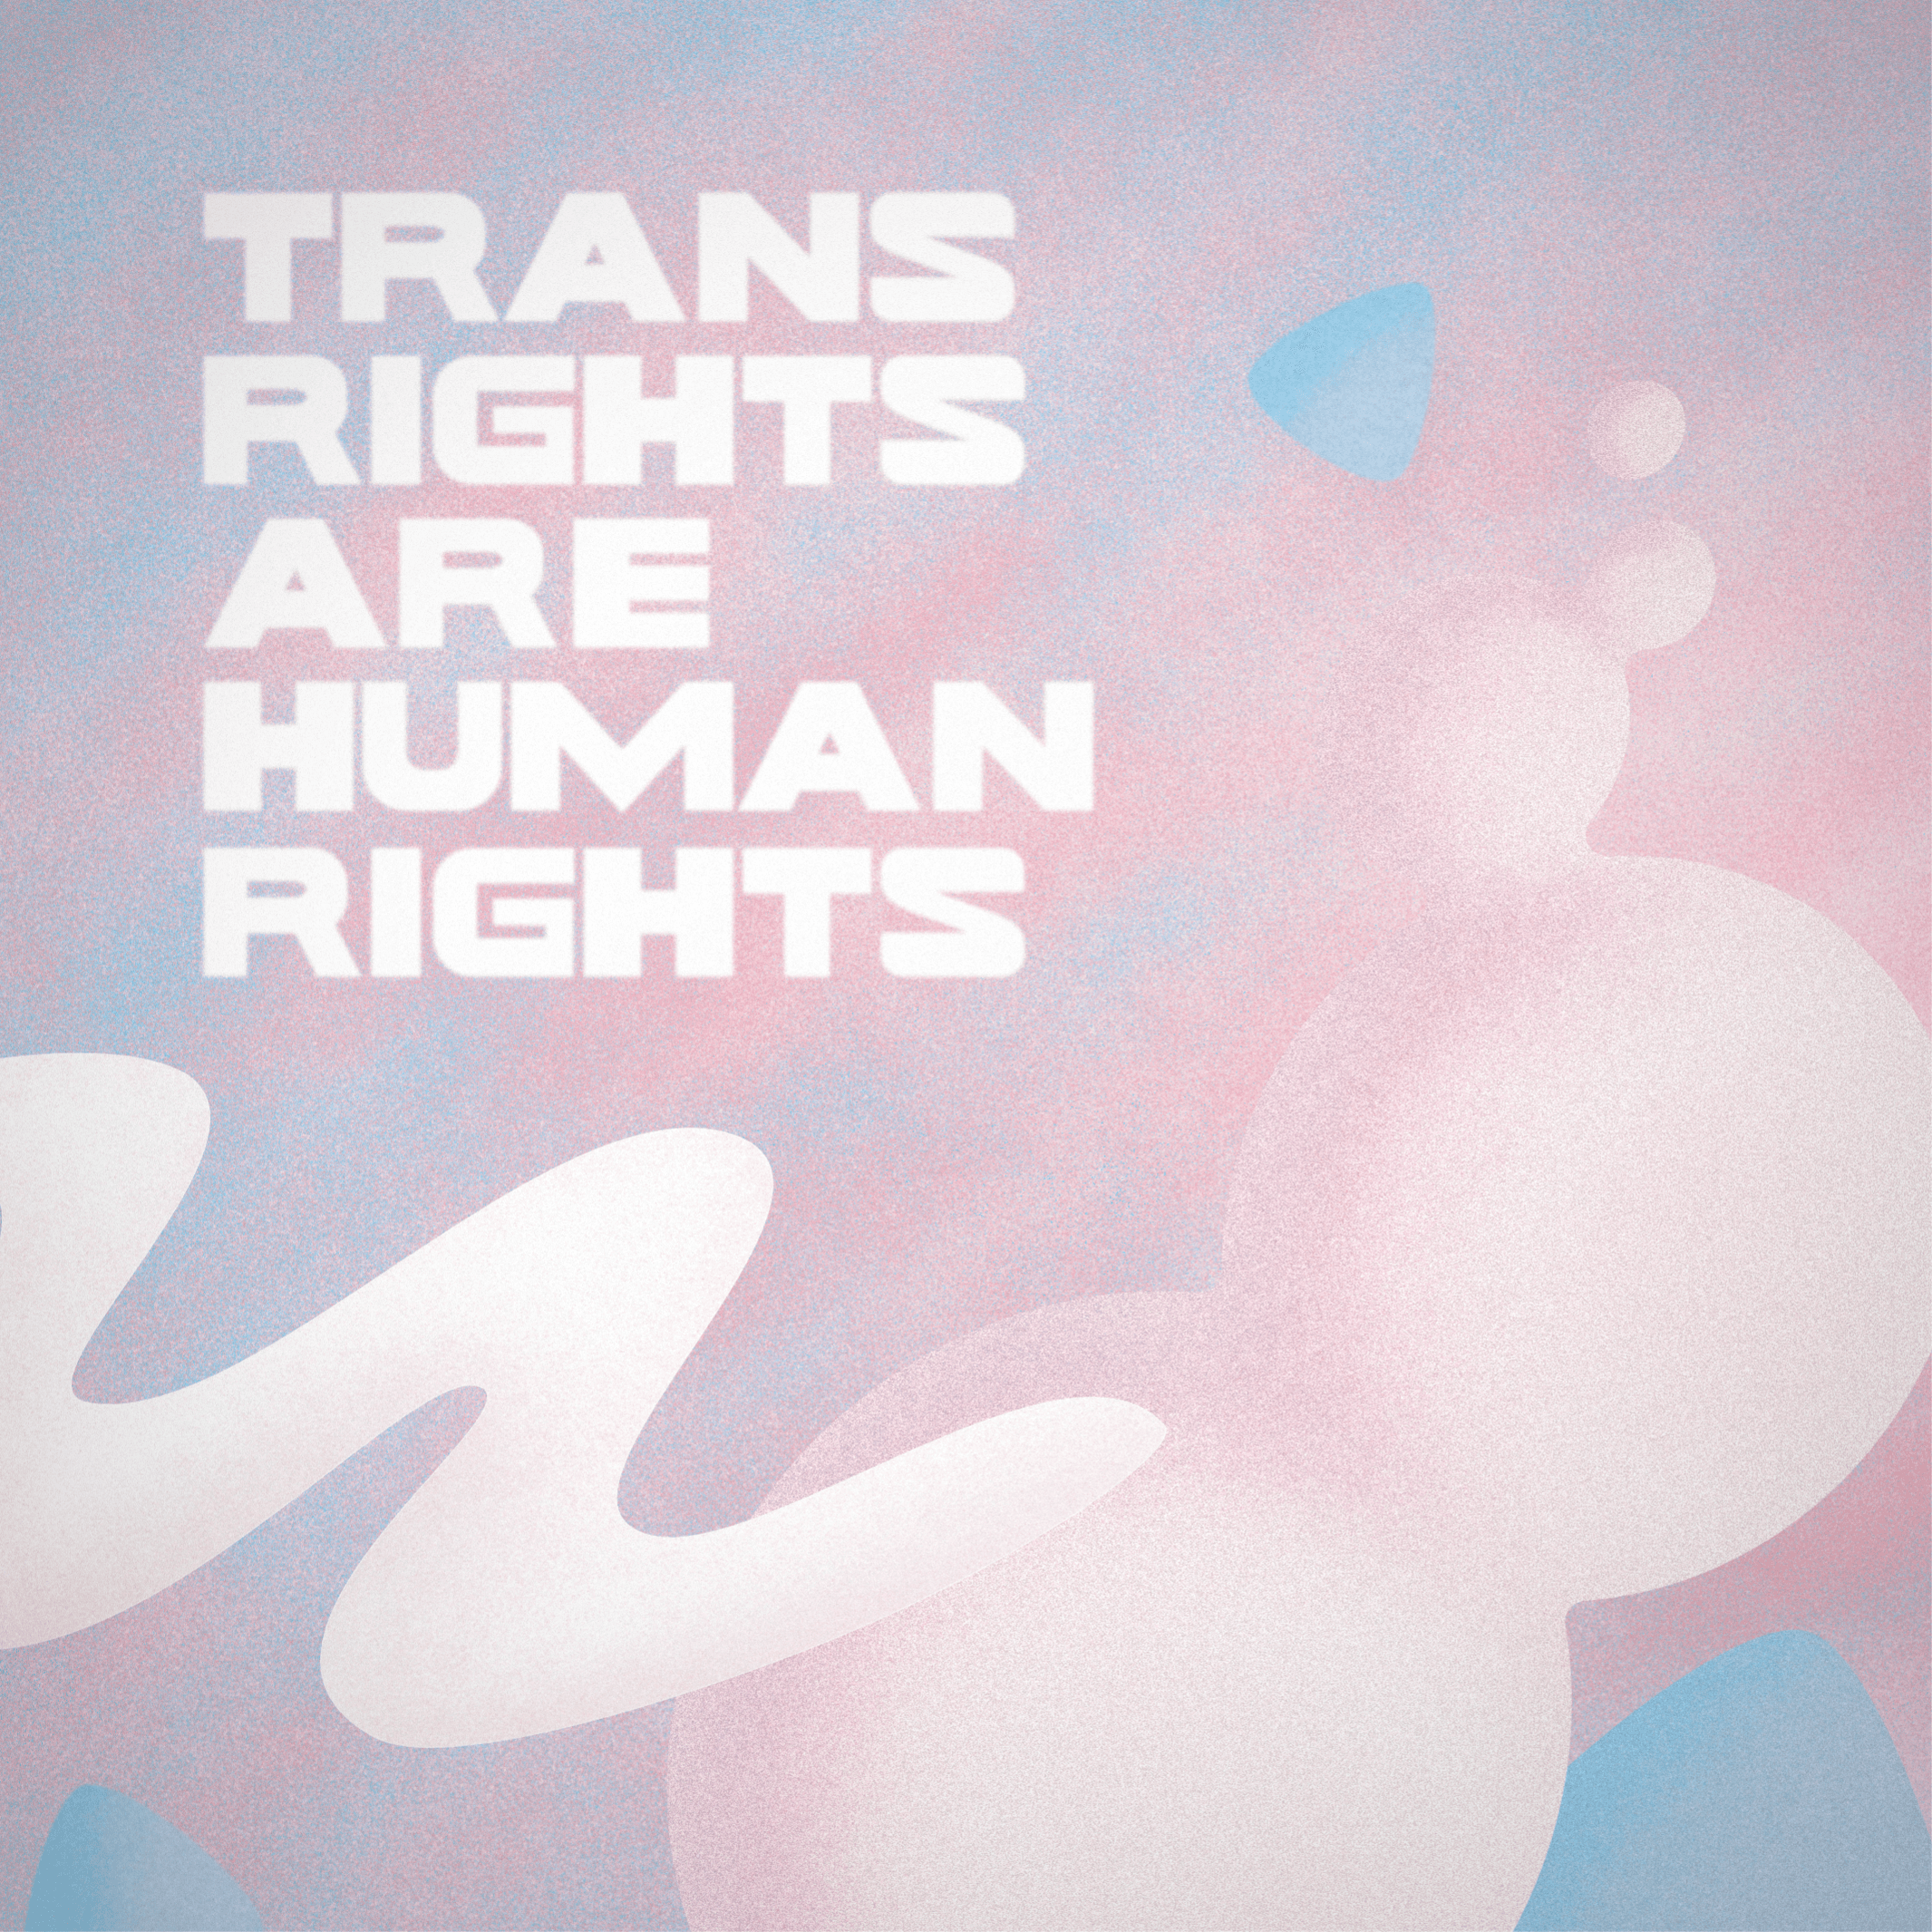 TRANS RIGHTS ARE HUMAN RIGHTS